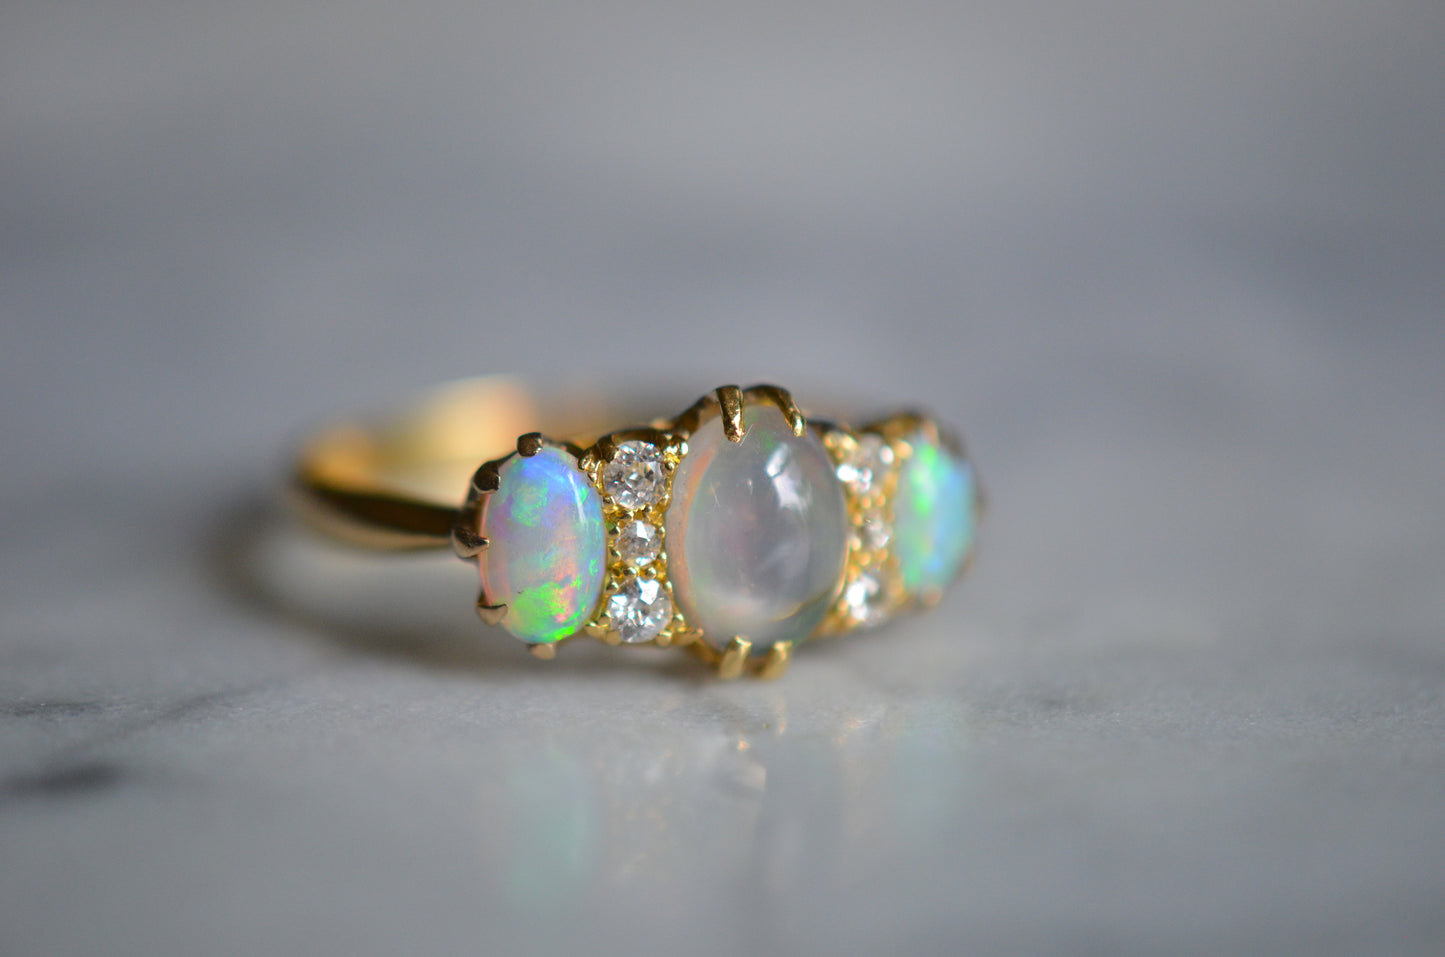 Ethereal Victorian-Style Opal Diamond Ring